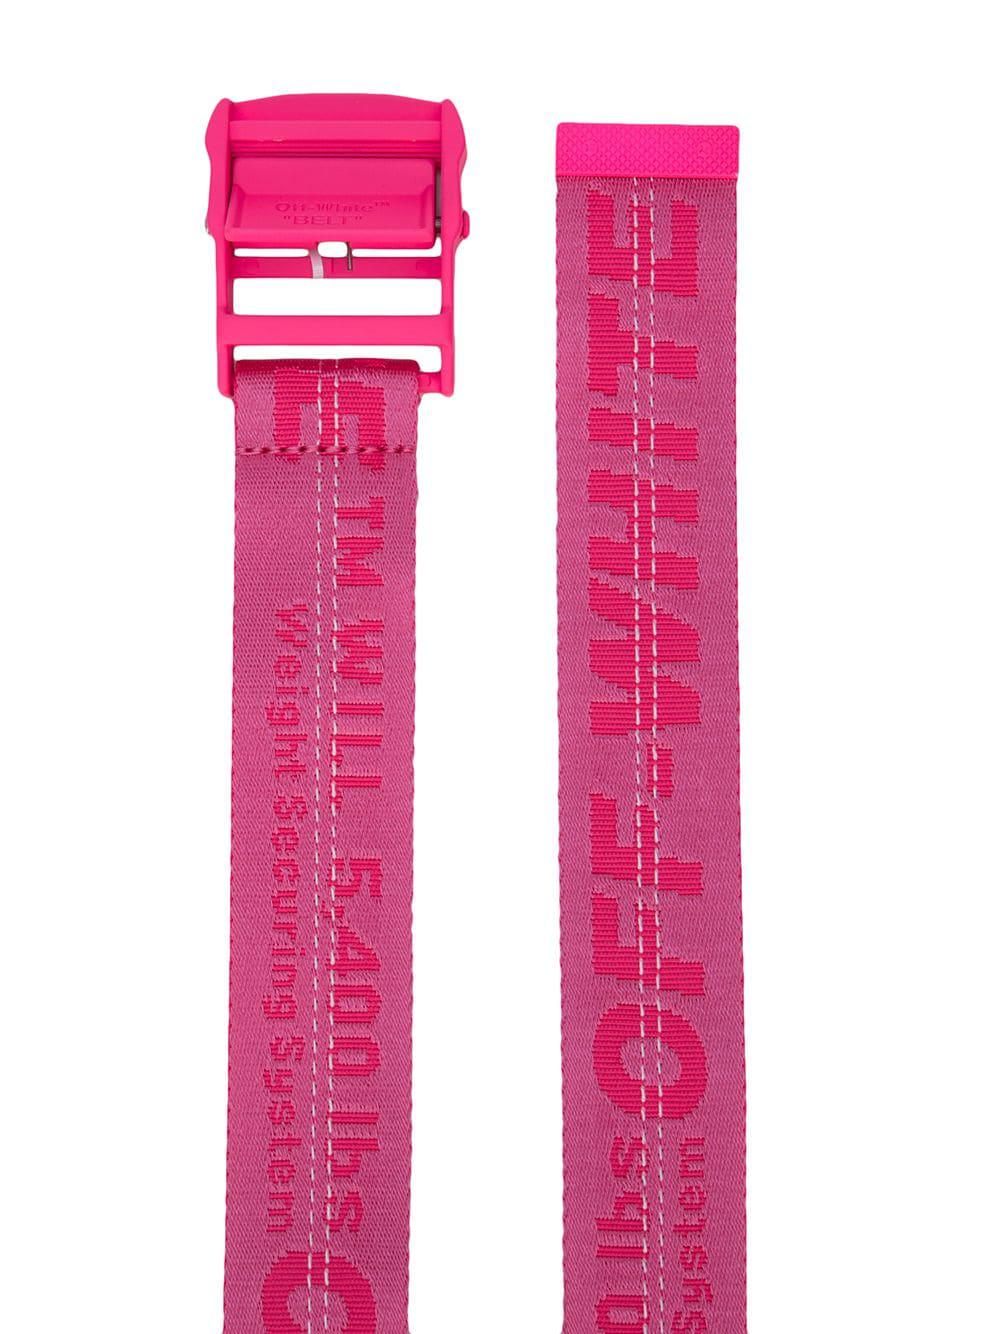 Off-White c/o Virgil Abloh Synthetic Industrial Logo Belt in Pink - Lyst